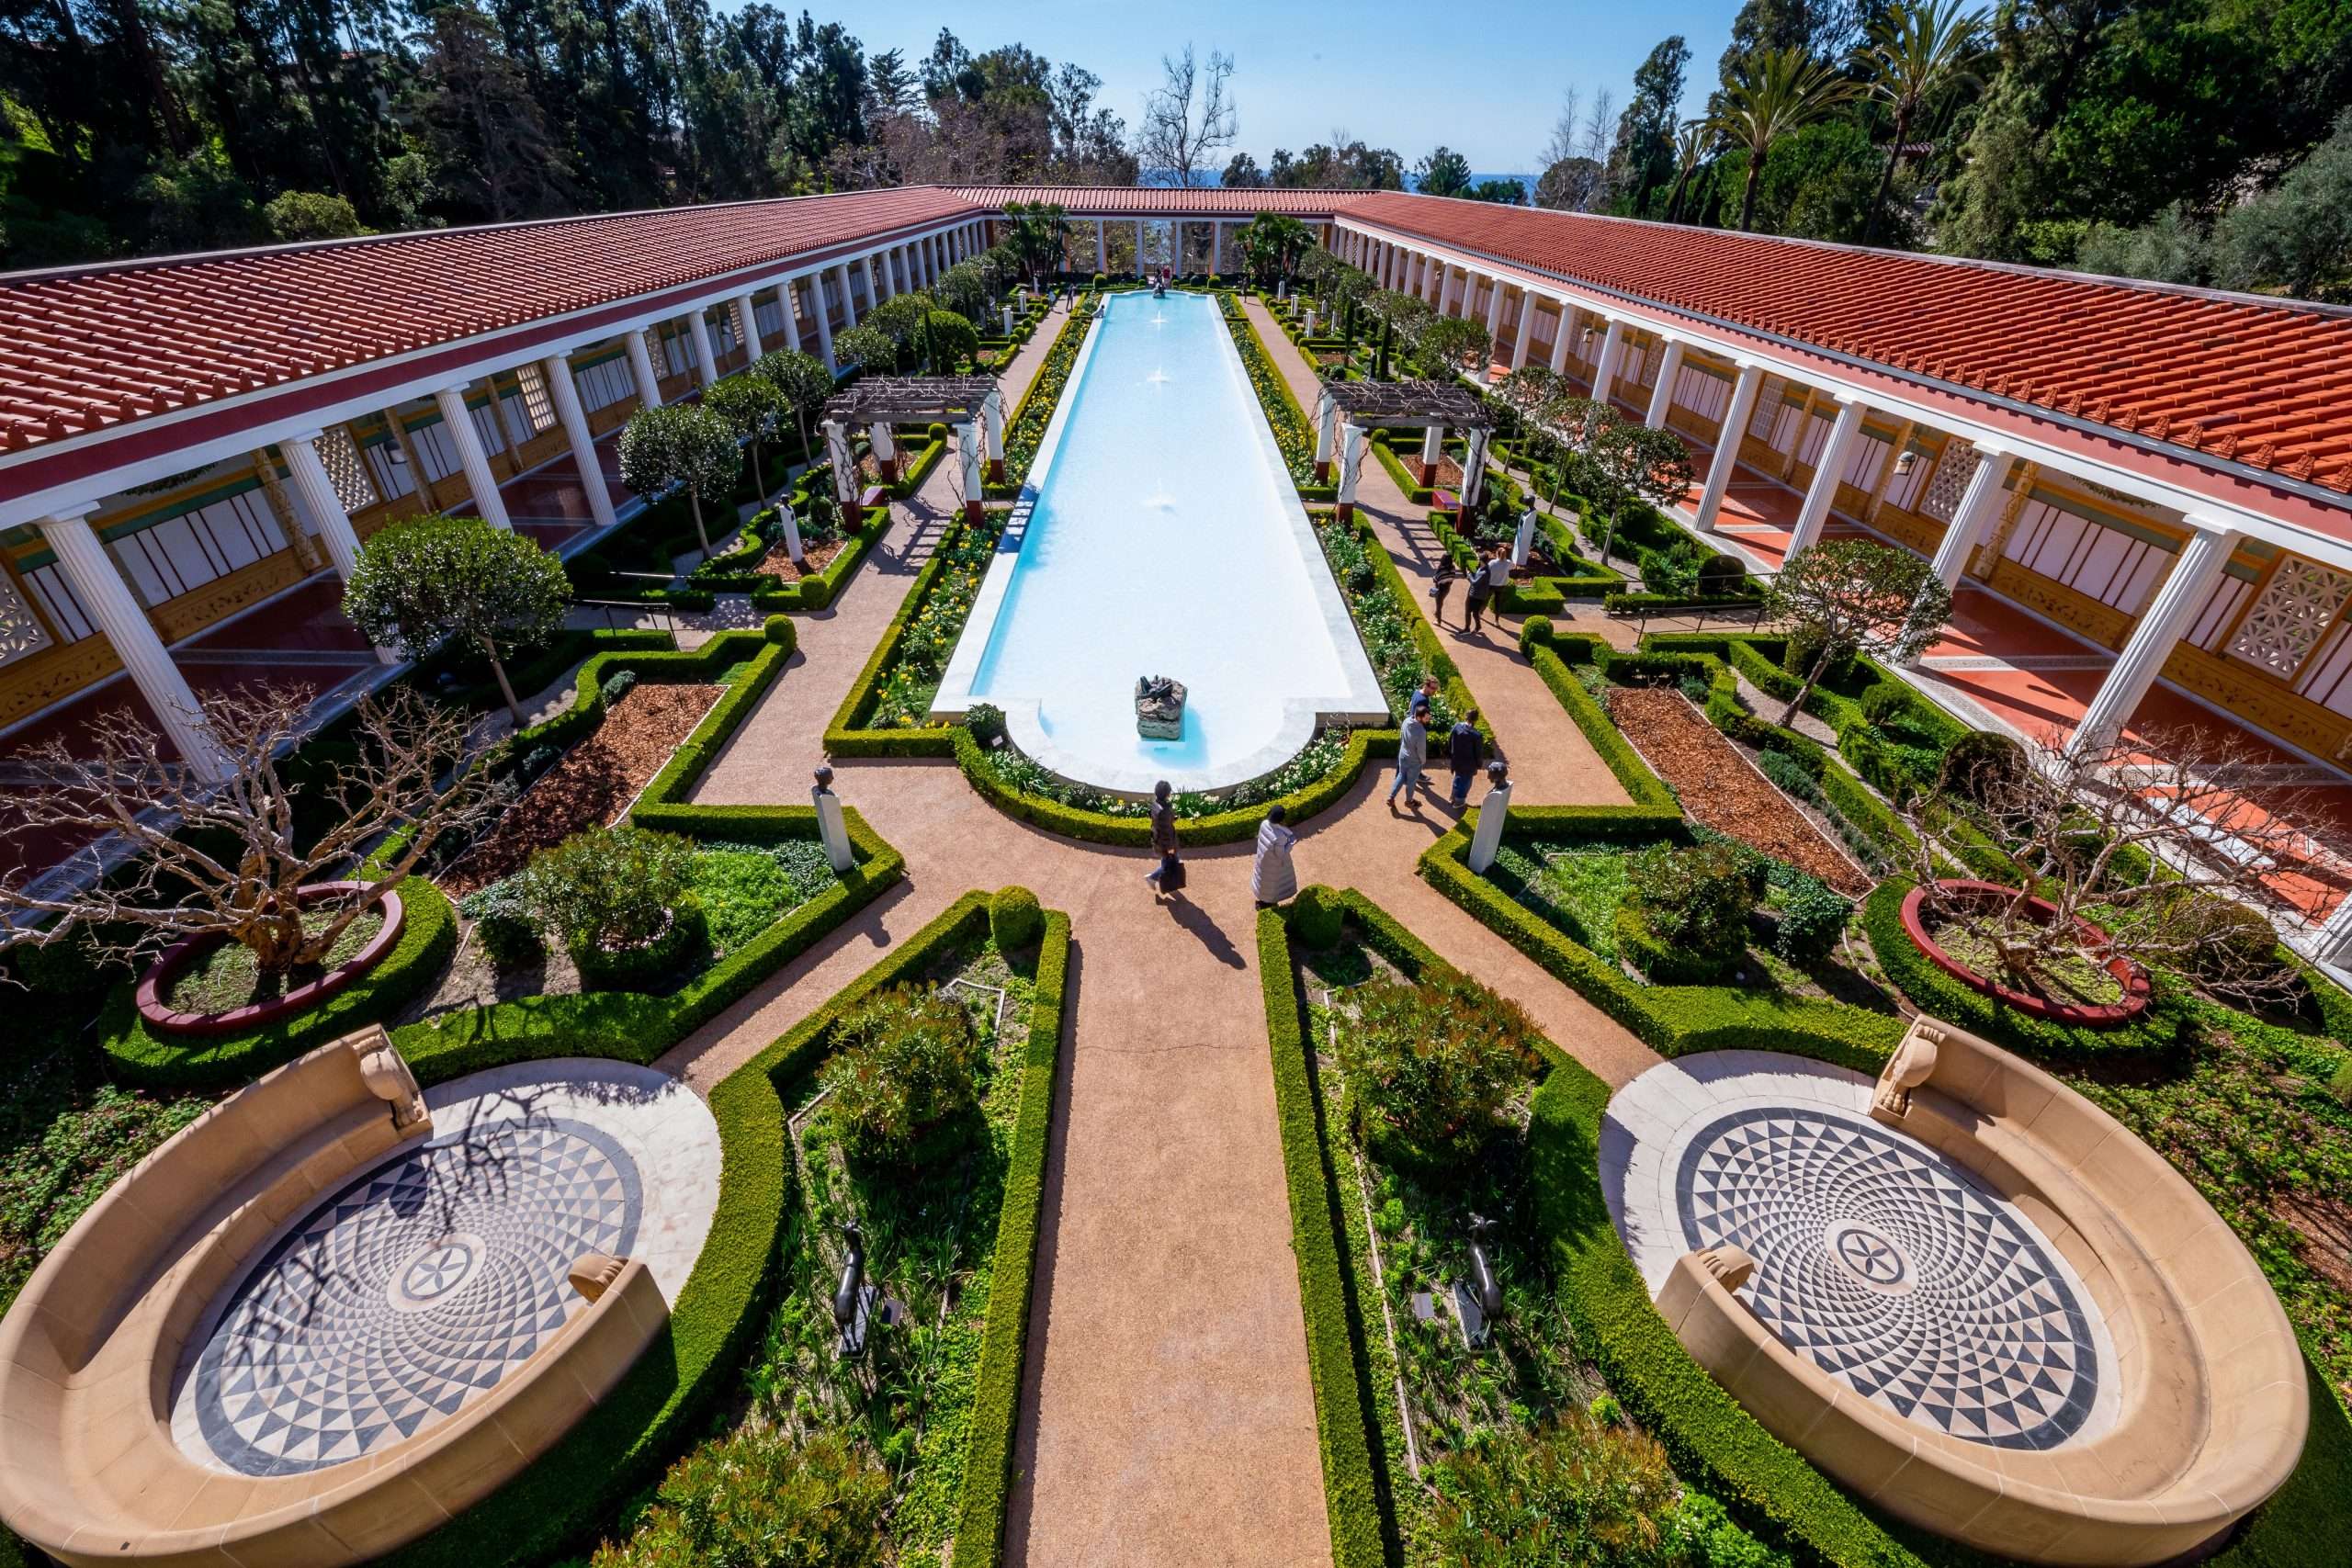 The J. Paul Getty Museum at the Getty Villa